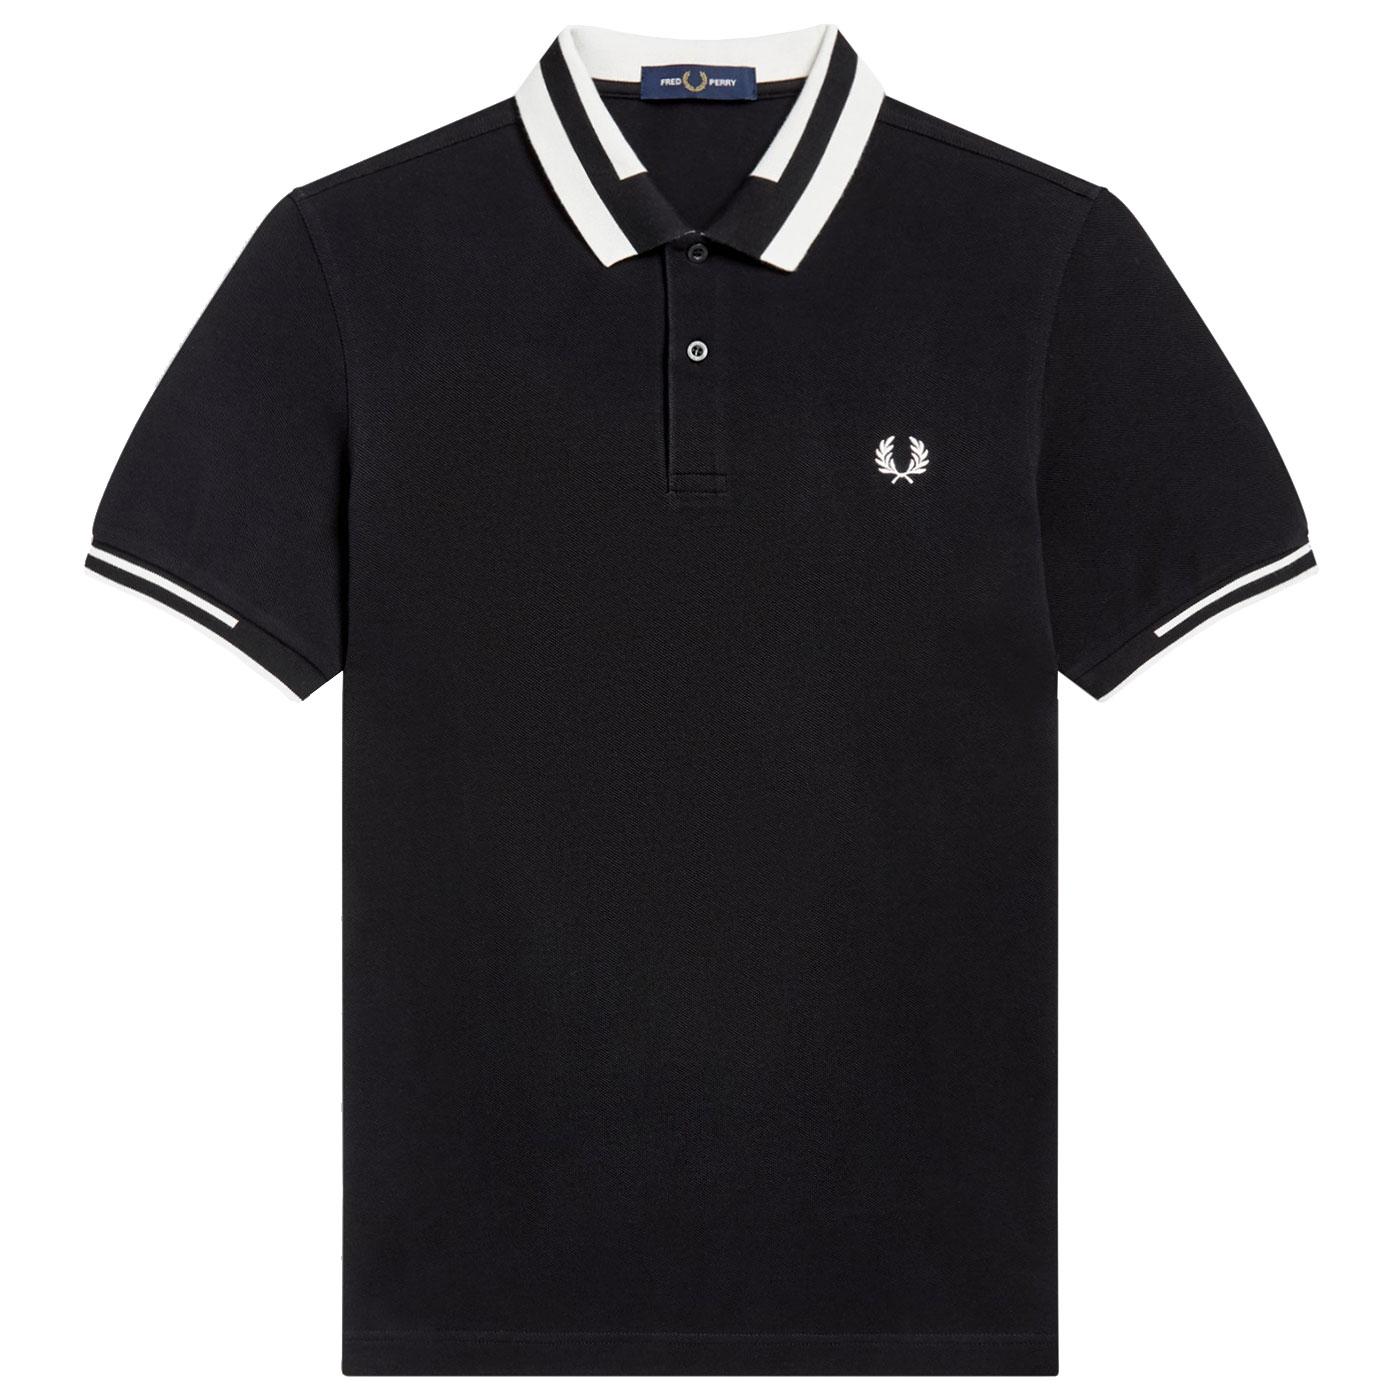 FRED PERRY Bold Tipped Retro Mod Pique Polo in Black